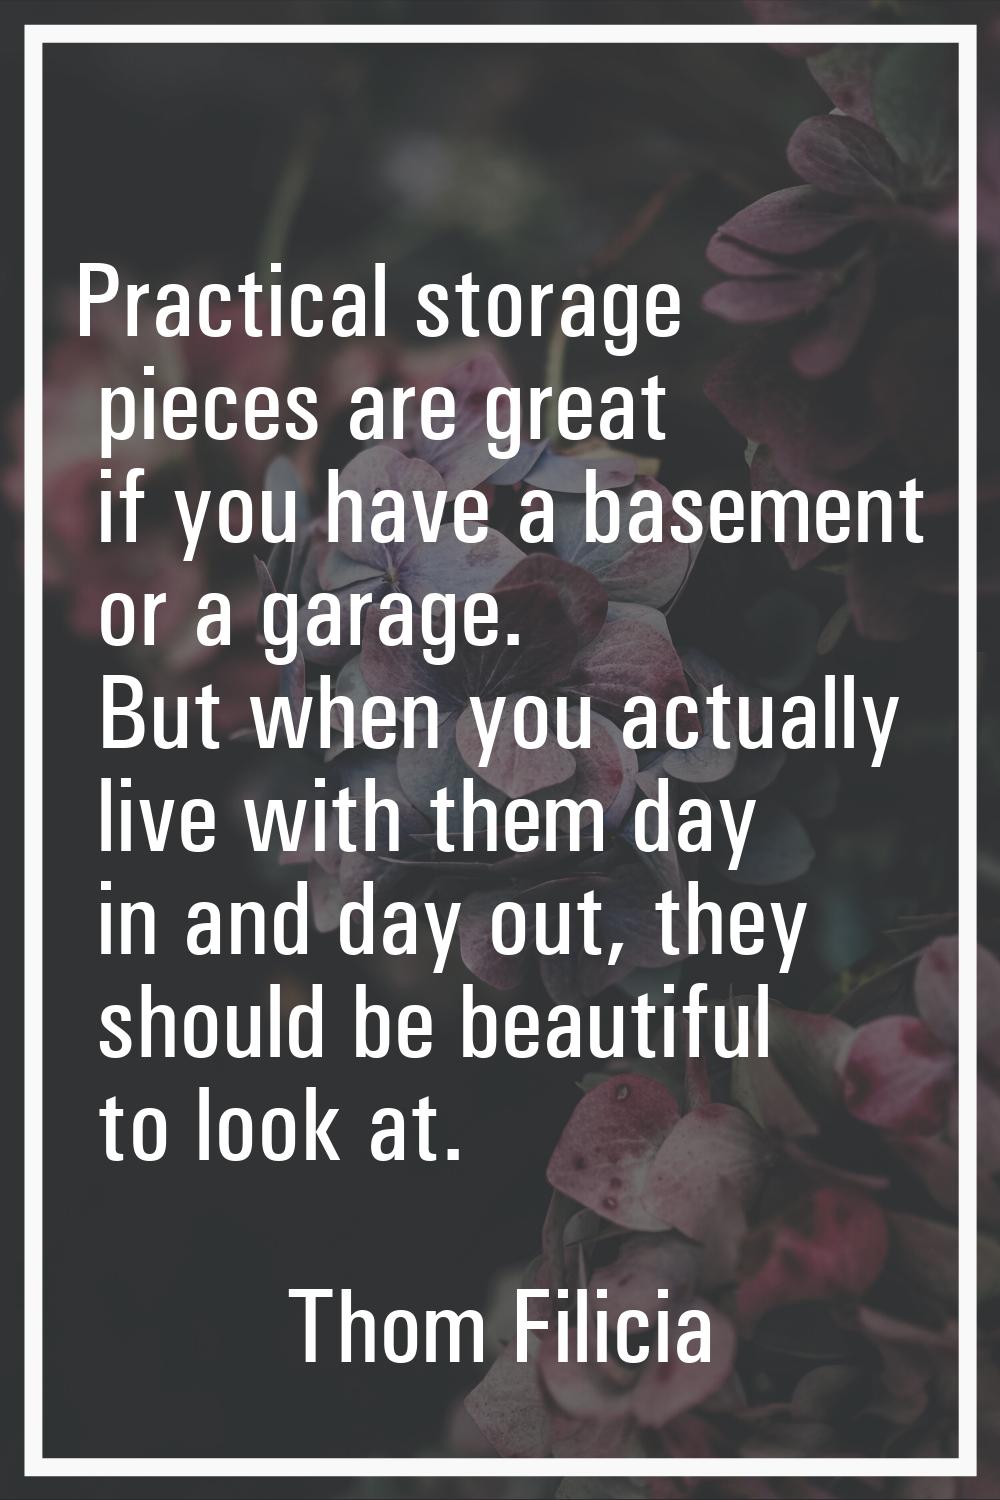 Practical storage pieces are great if you have a basement or a garage. But when you actually live w